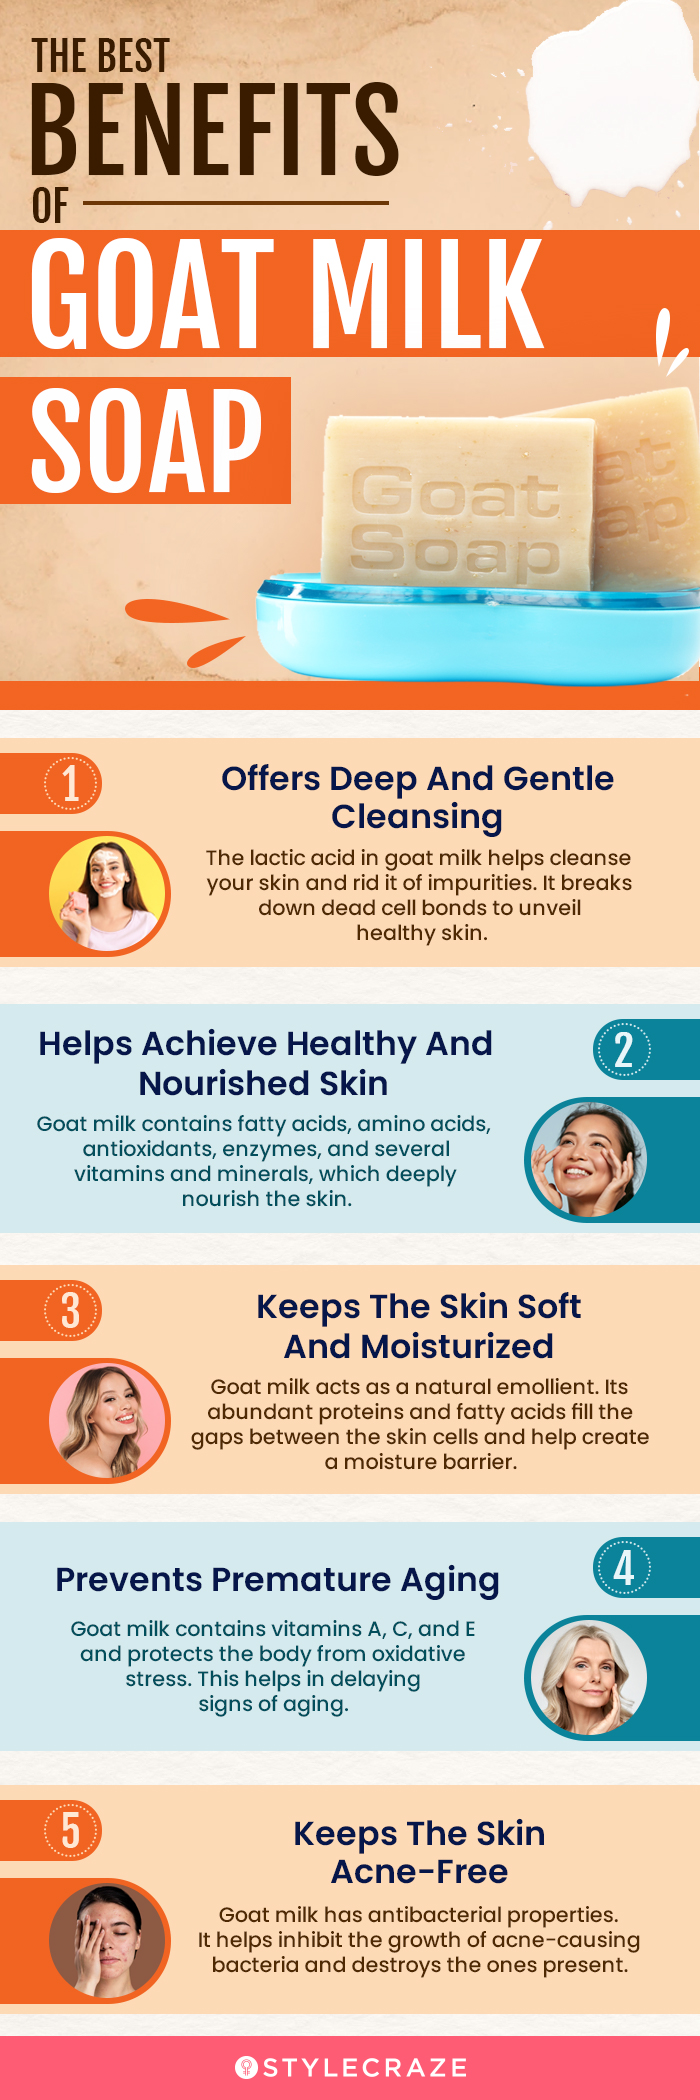 the best benefits of goat milk soap (infographic)